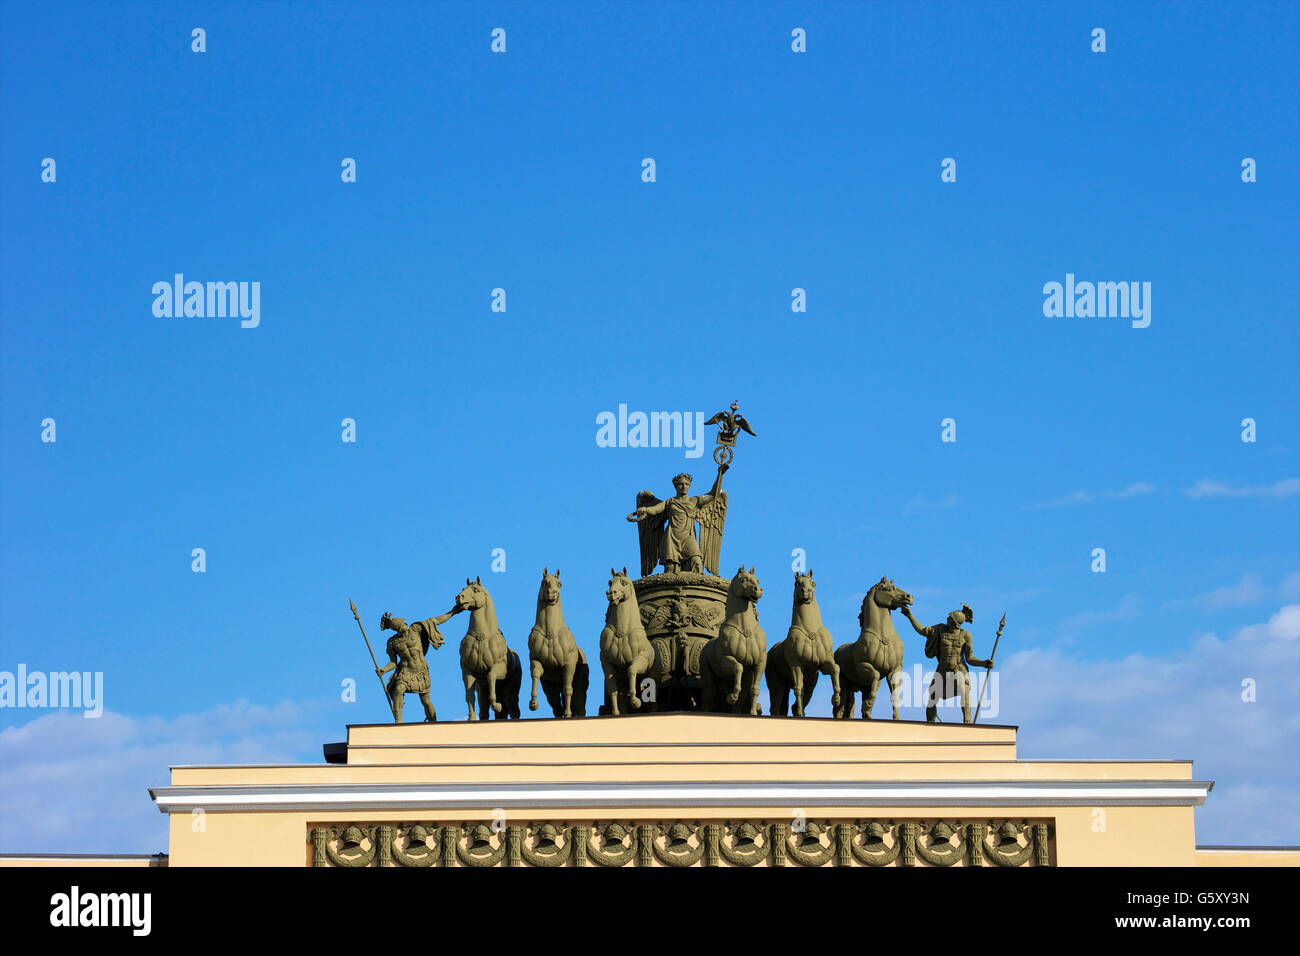 Winged Victory on a Chariot, General Staff Building, Palace Square, Saint Petersburg, Russia Stock Photo